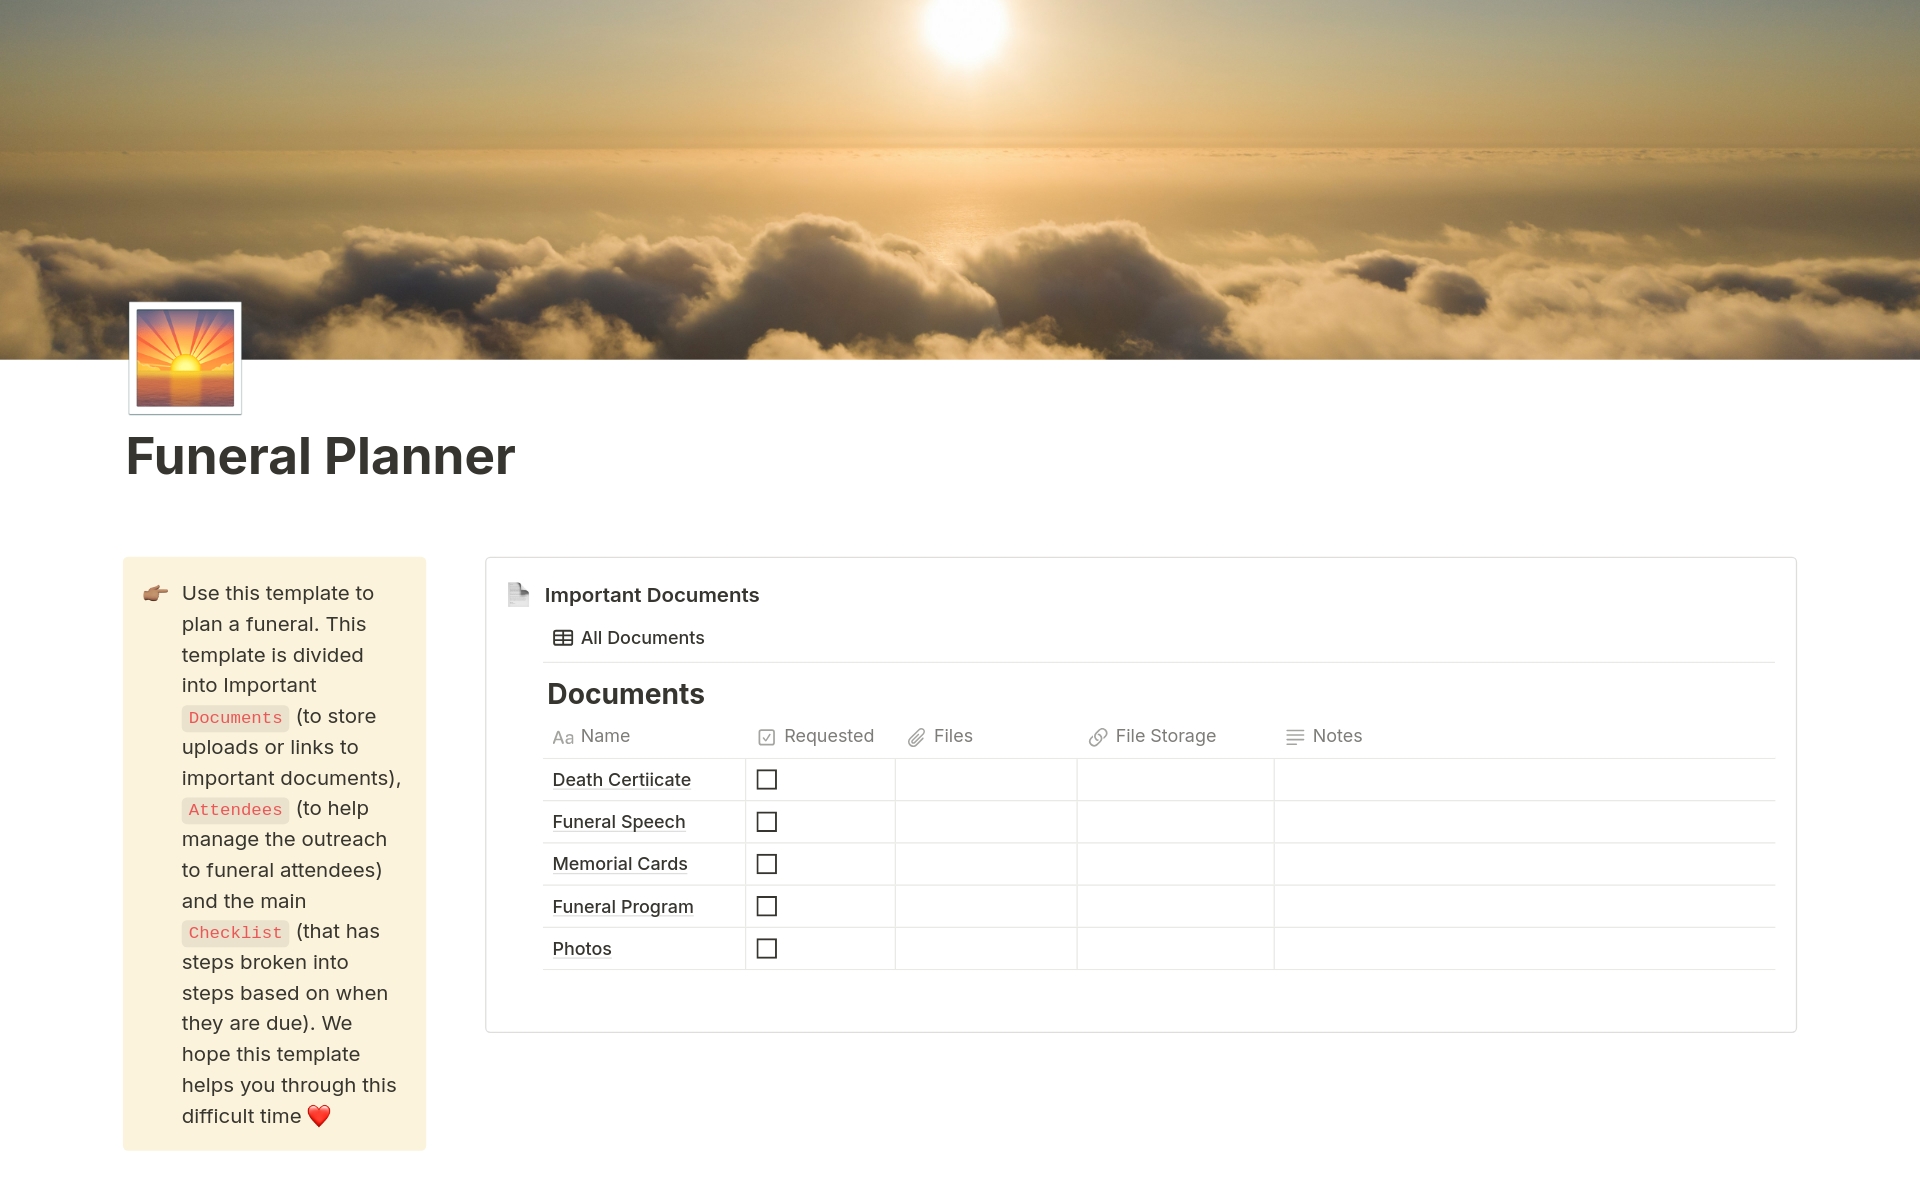 Organizing a funeral can be a profoundly emotional and stressful experience. Our Funeral Planner Template is designed to alleviate some of that stress by providing a structured and easy-to-follow framework. 